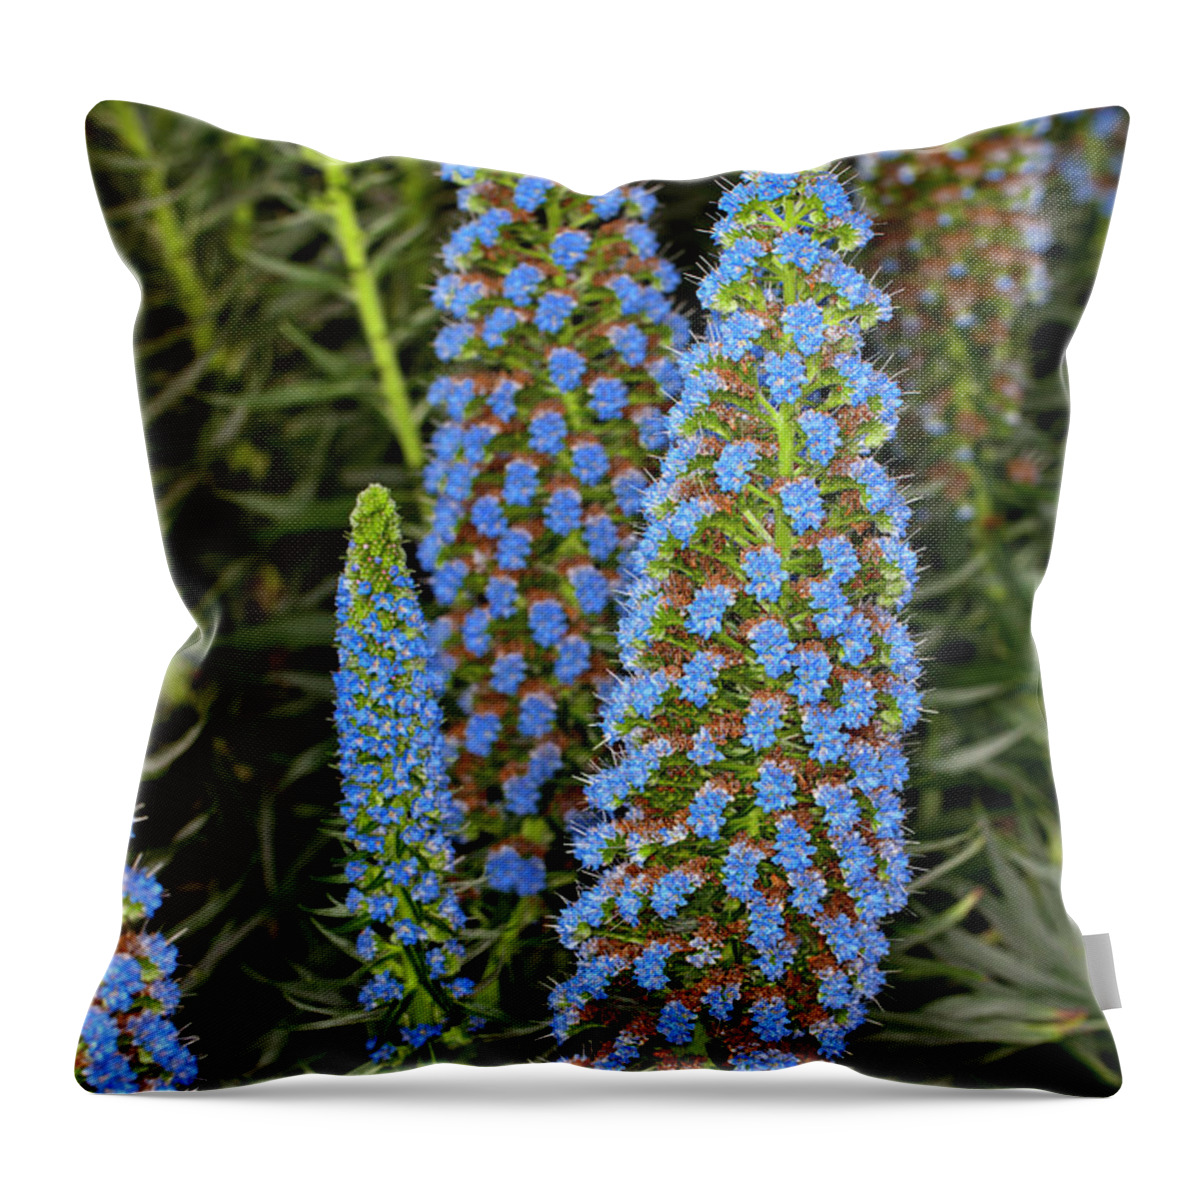 Echium Candicans Throw Pillow featuring the photograph Select Blue Pride-of-Madeira #2 by Anthony Totah